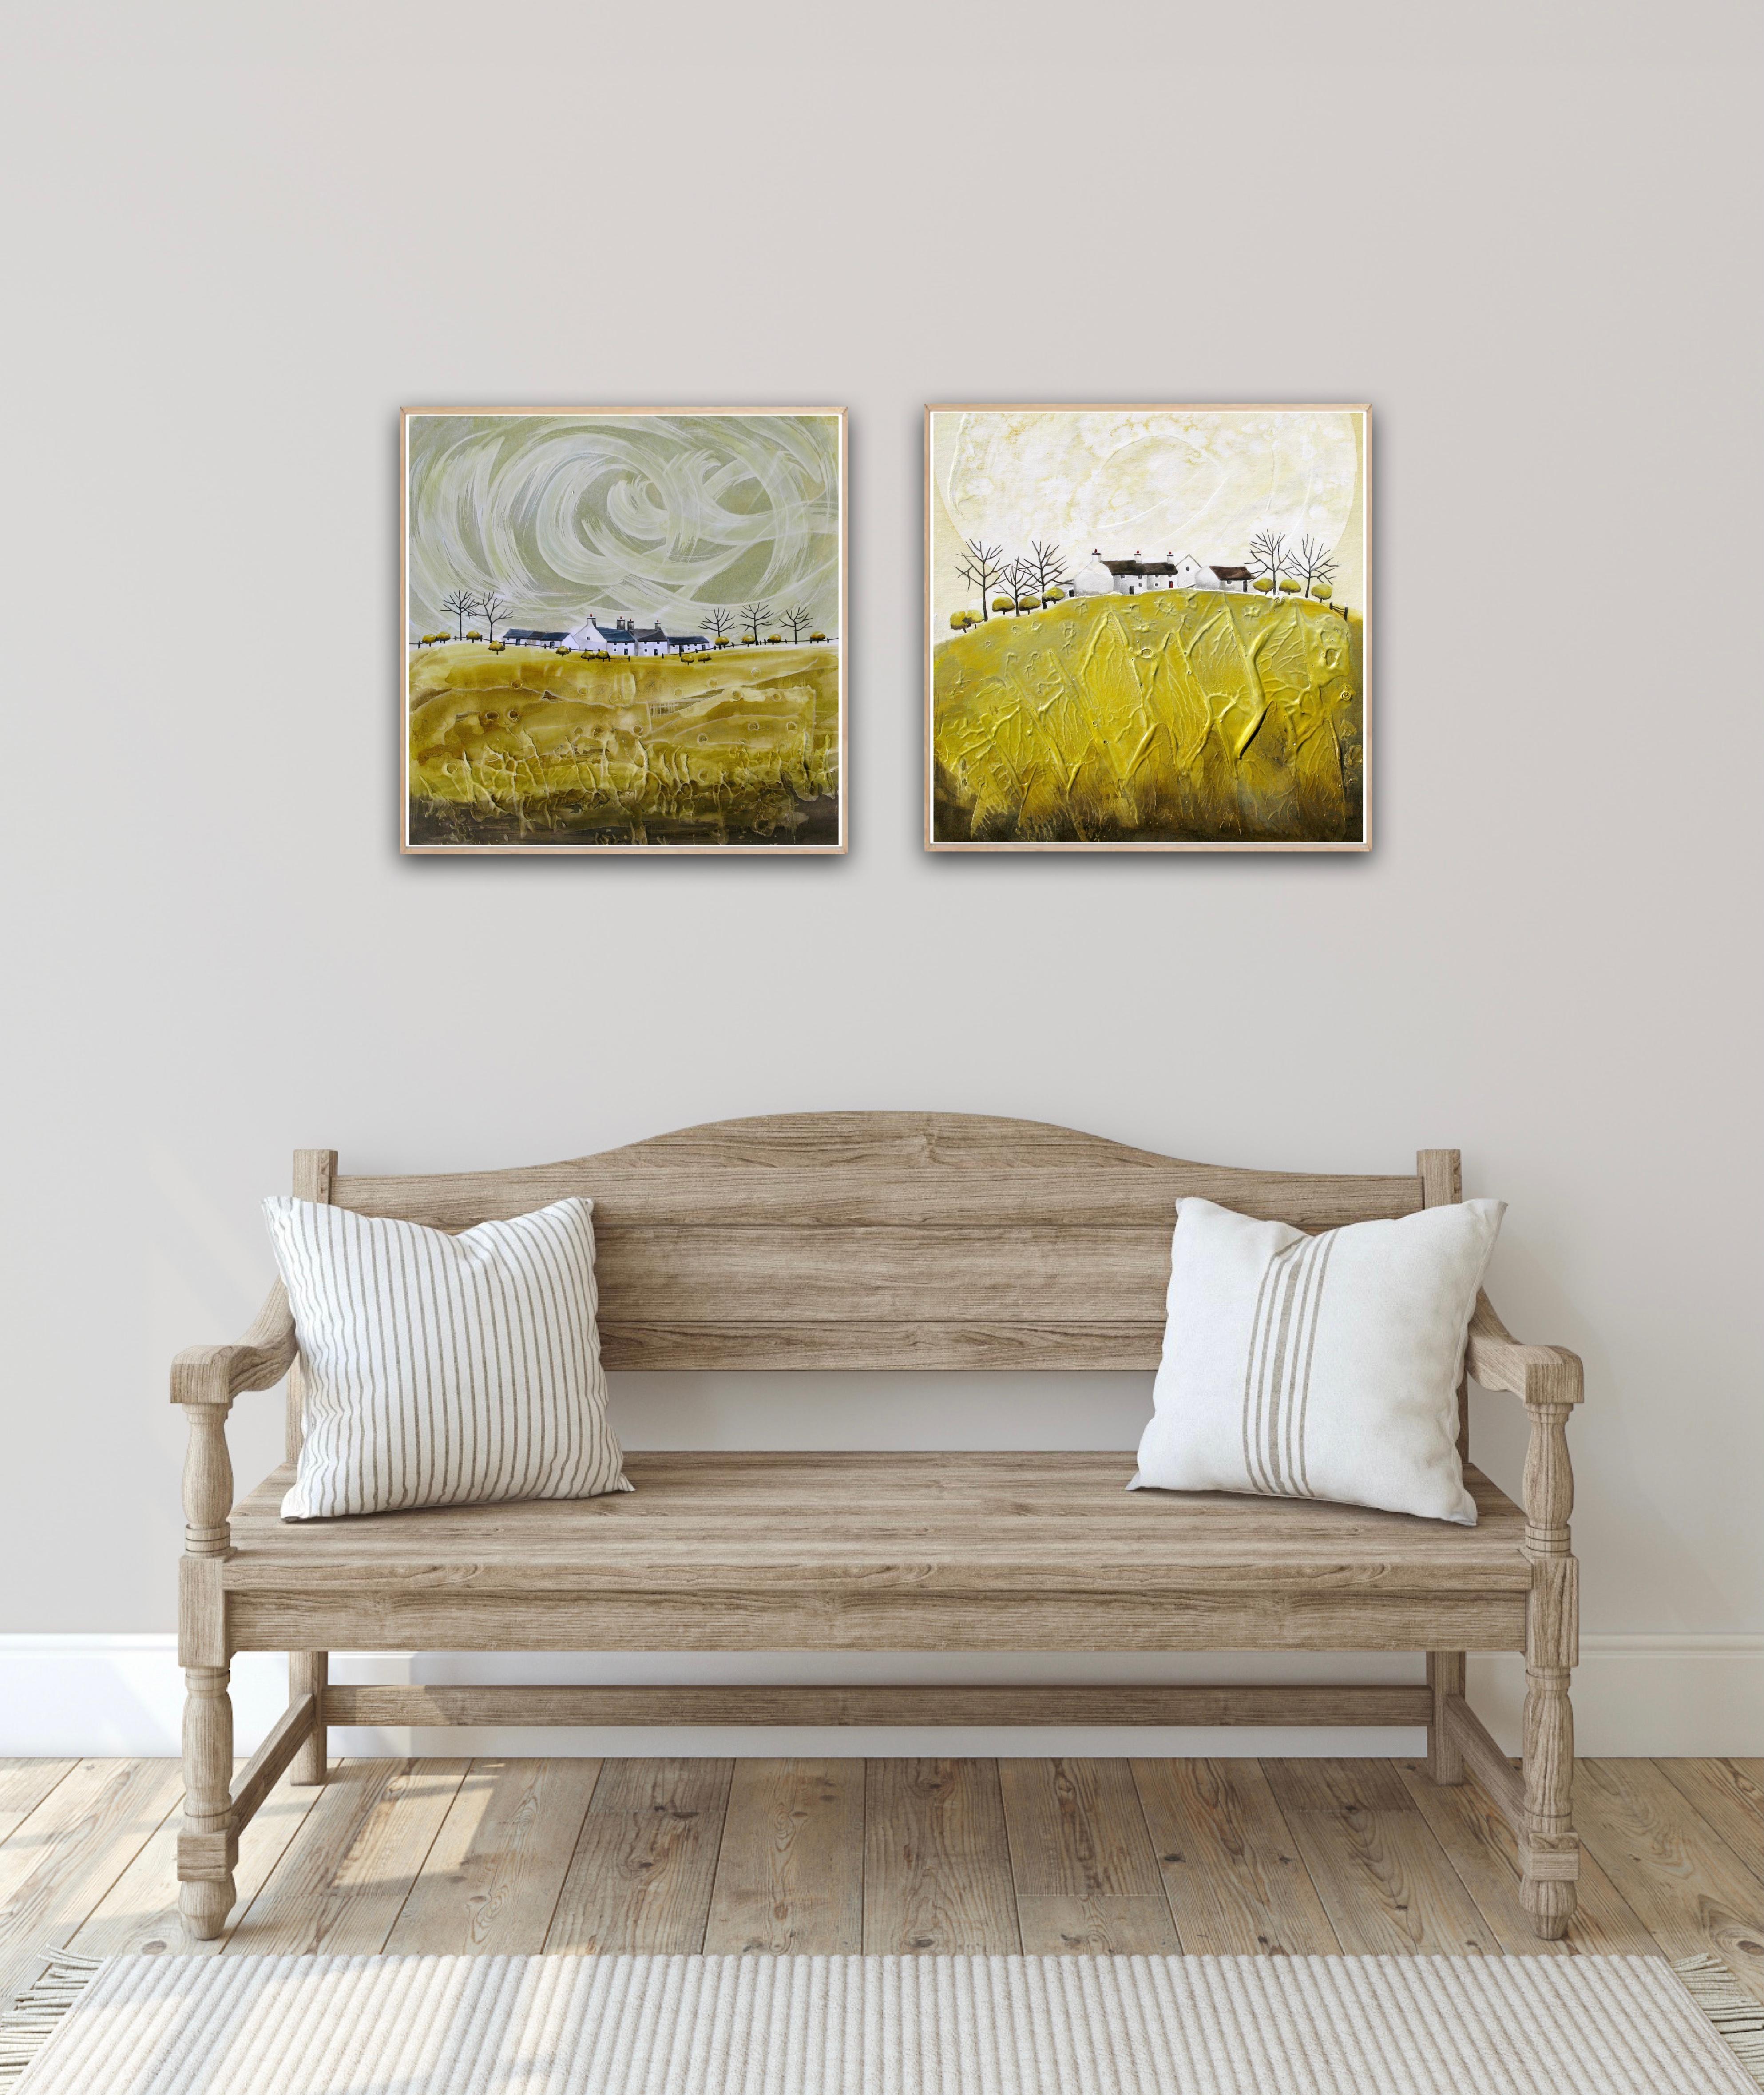 Crater Valley Farm and Crater Cottages 3 diptych For Sale 1